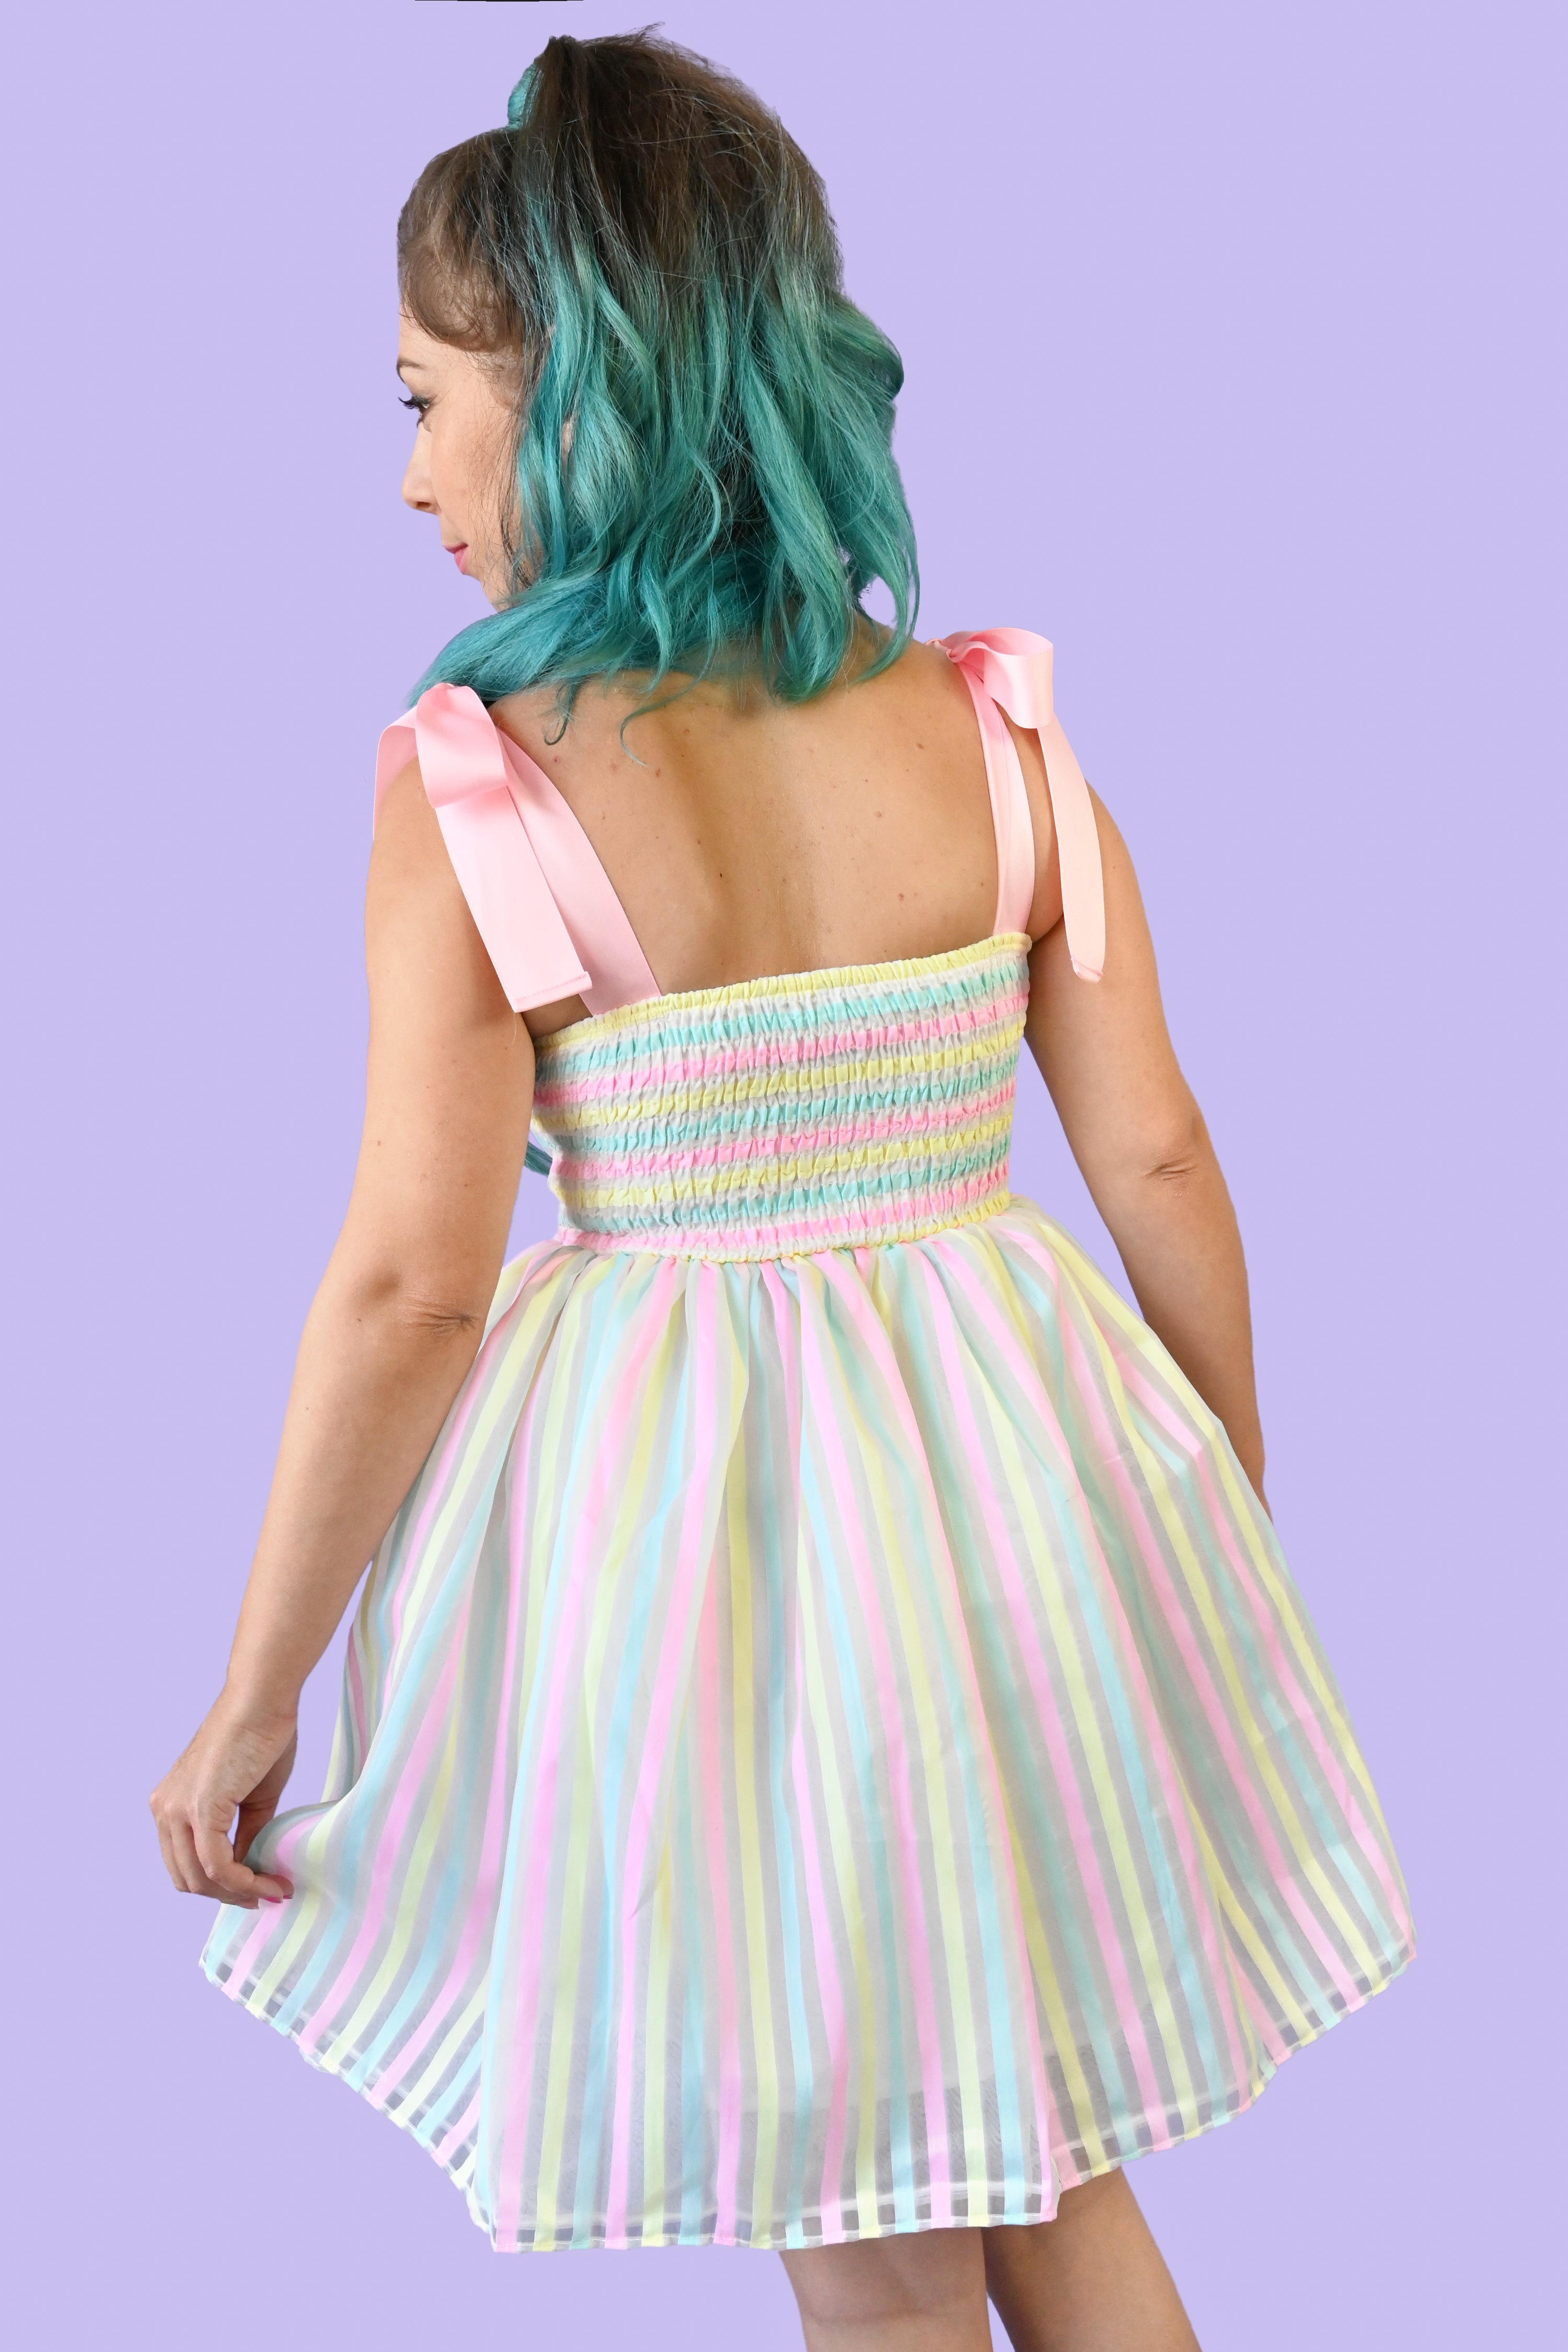 Back view of the dress. Pink ribbon straps, horizontal pastel yellow, blue, and pinkstripes on a shirred bodice and a cupcake style sheer vertical striped skirt over a white slip